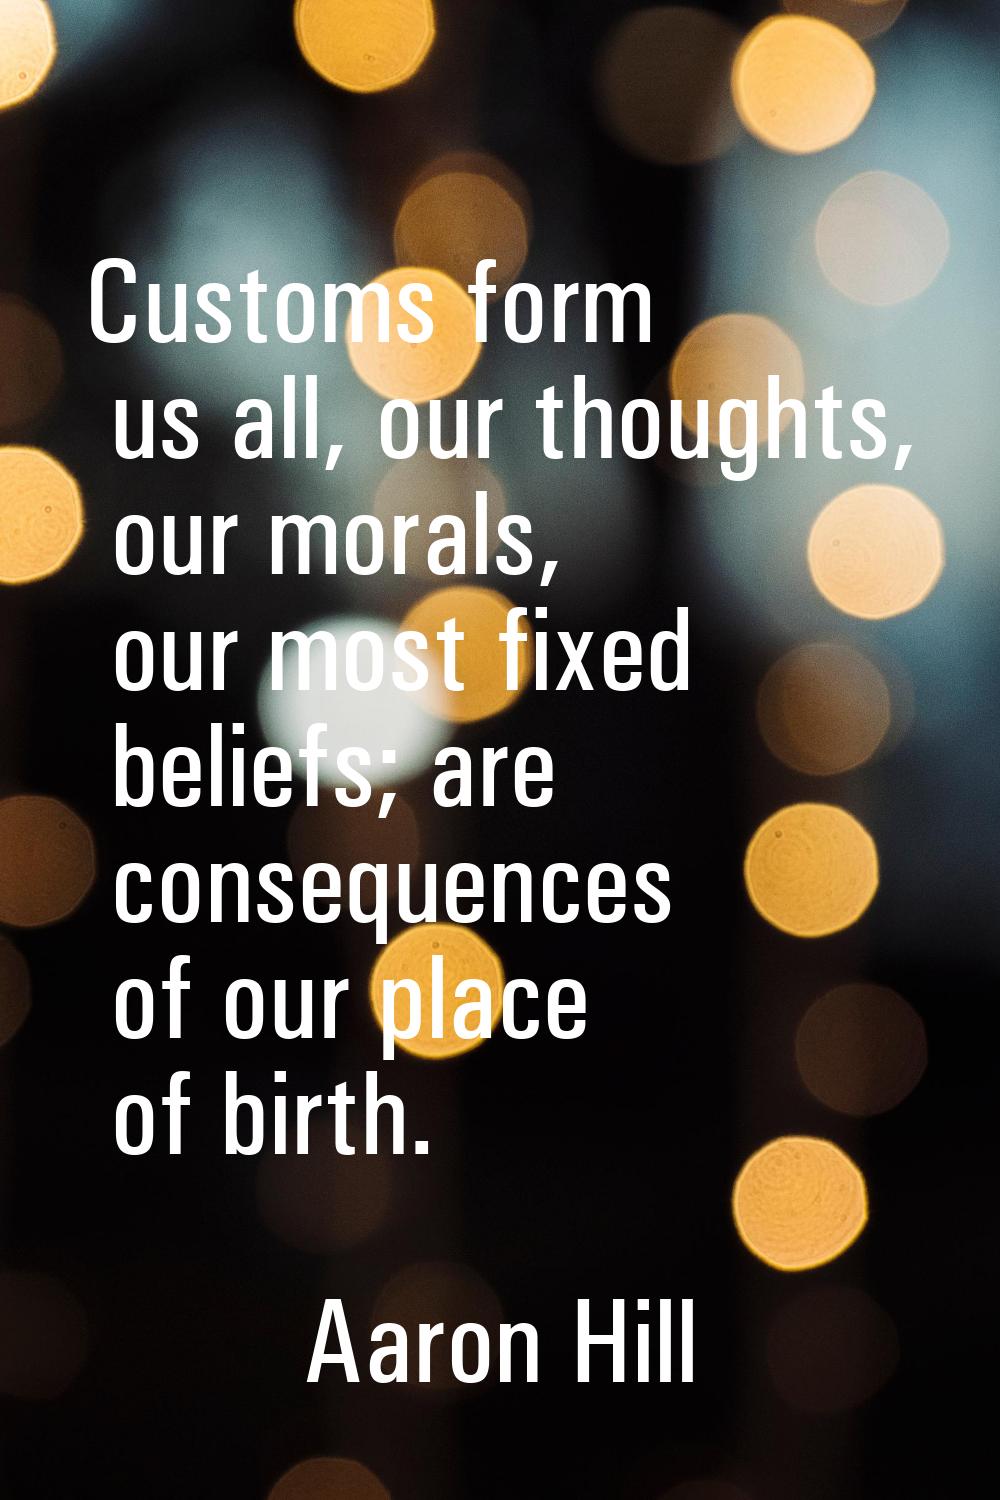 Customs form us all, our thoughts, our morals, our most fixed beliefs; are consequences of our plac